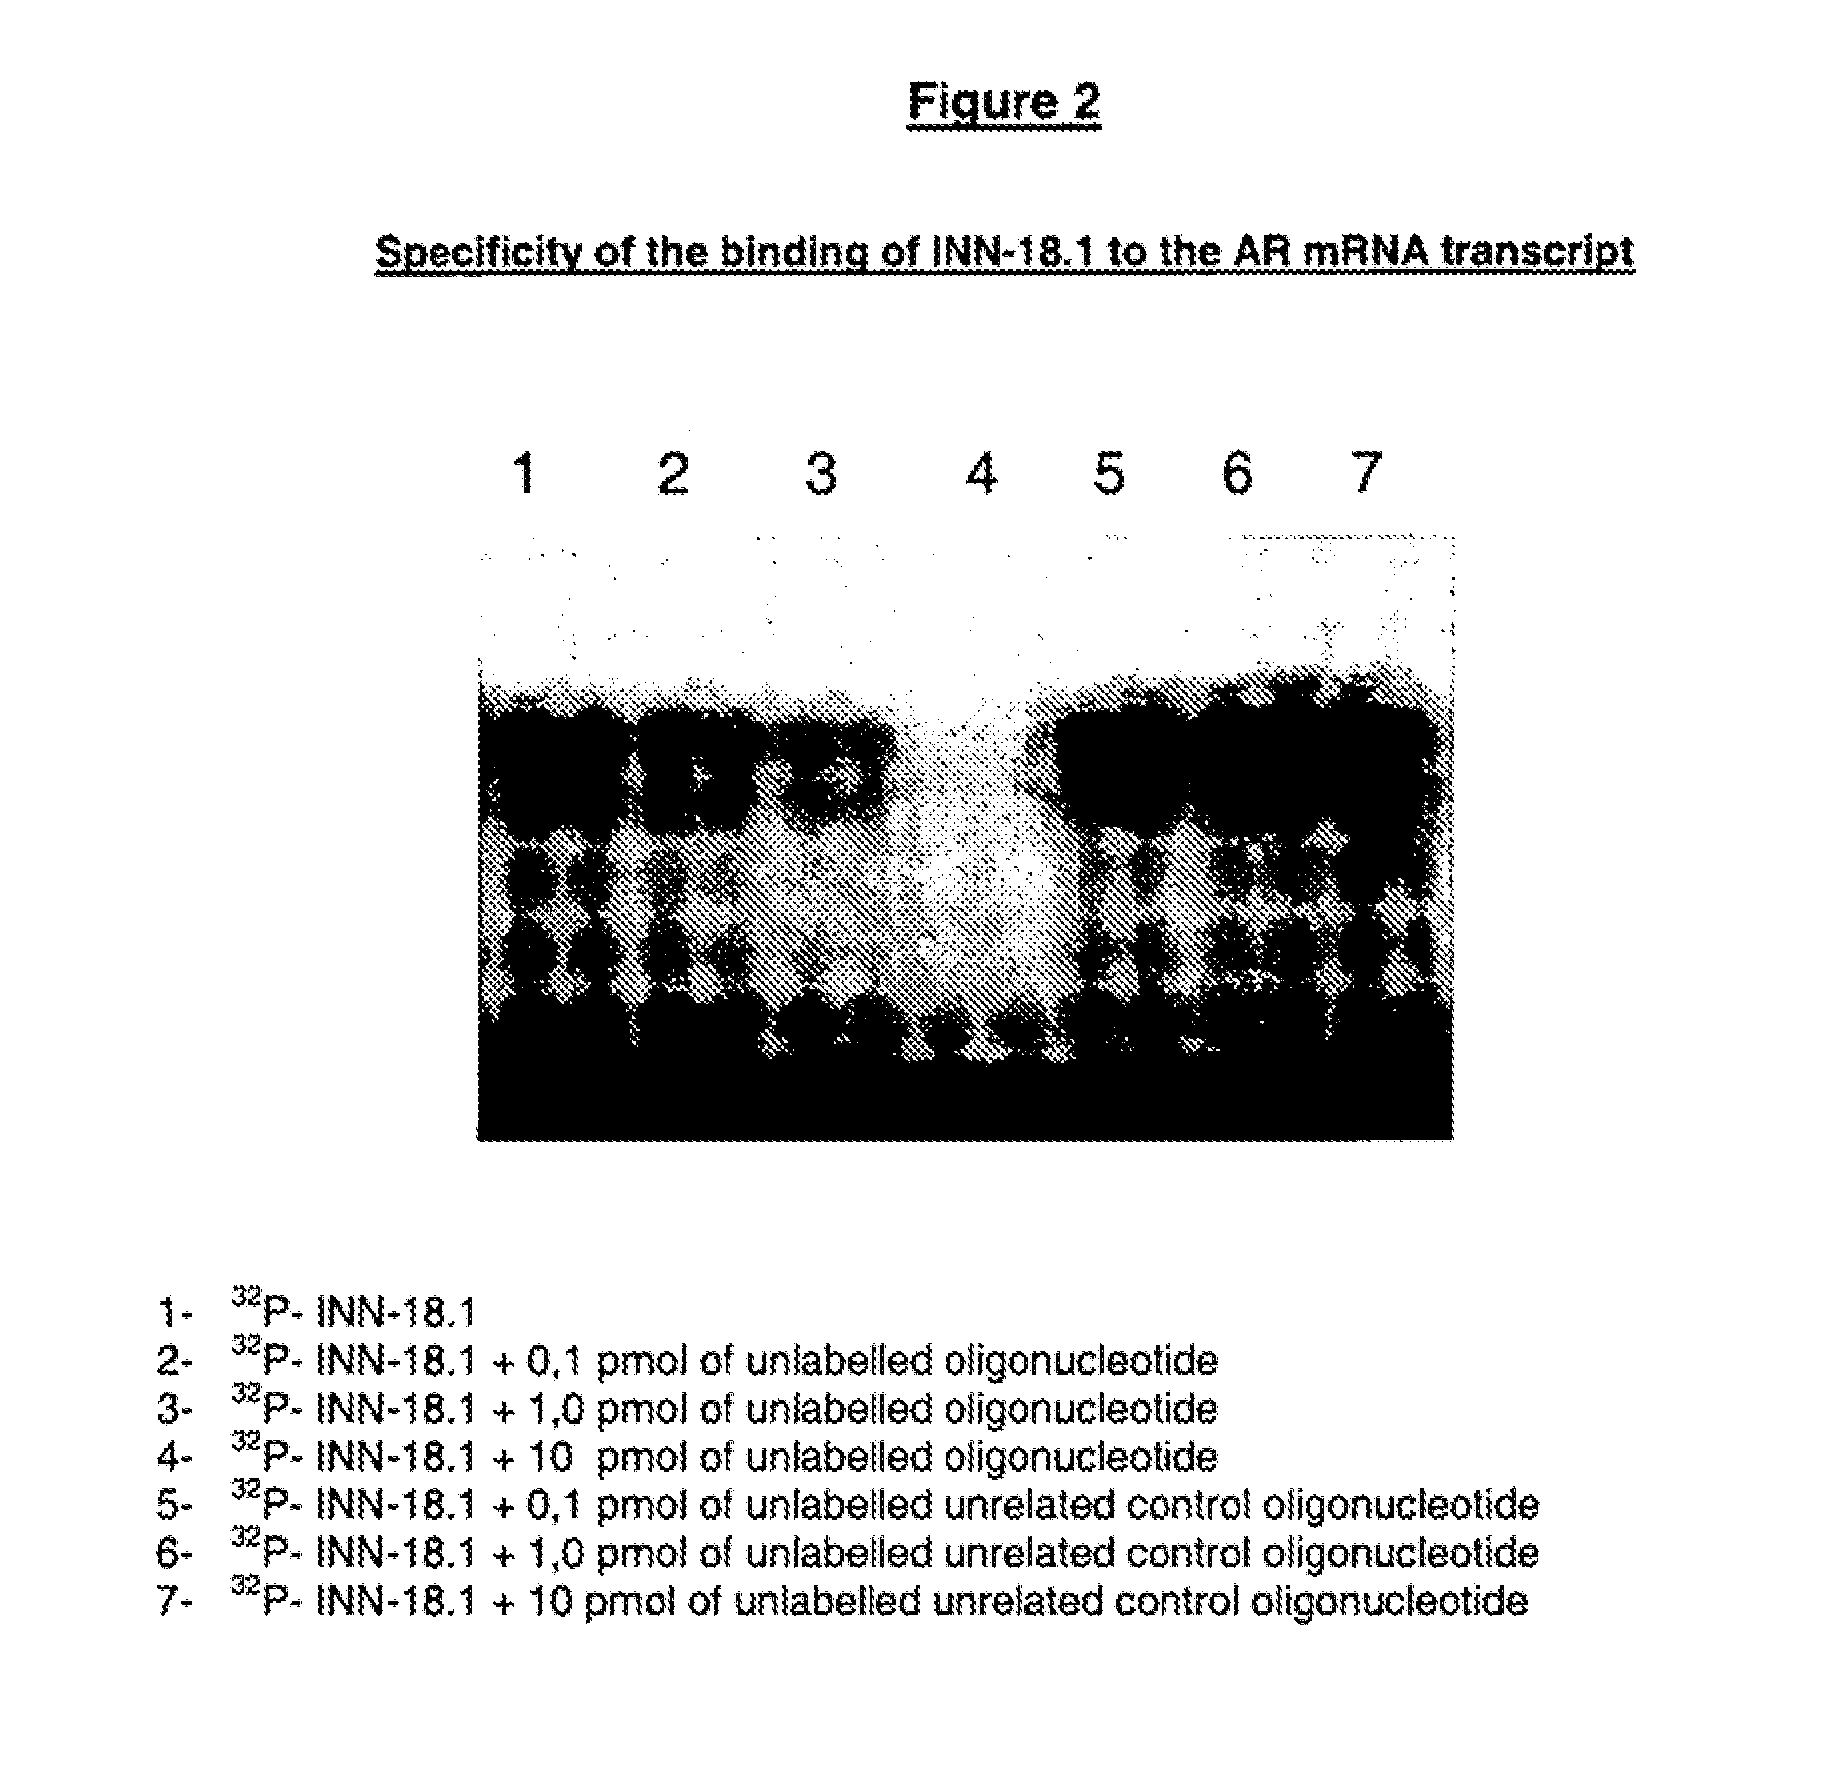 Antiandrogen oligonucleotides usable for the treatment of dermatological androgen-related disorders relating to androgen metabolism, their pharmaceutical compositions, their uses and treatment method